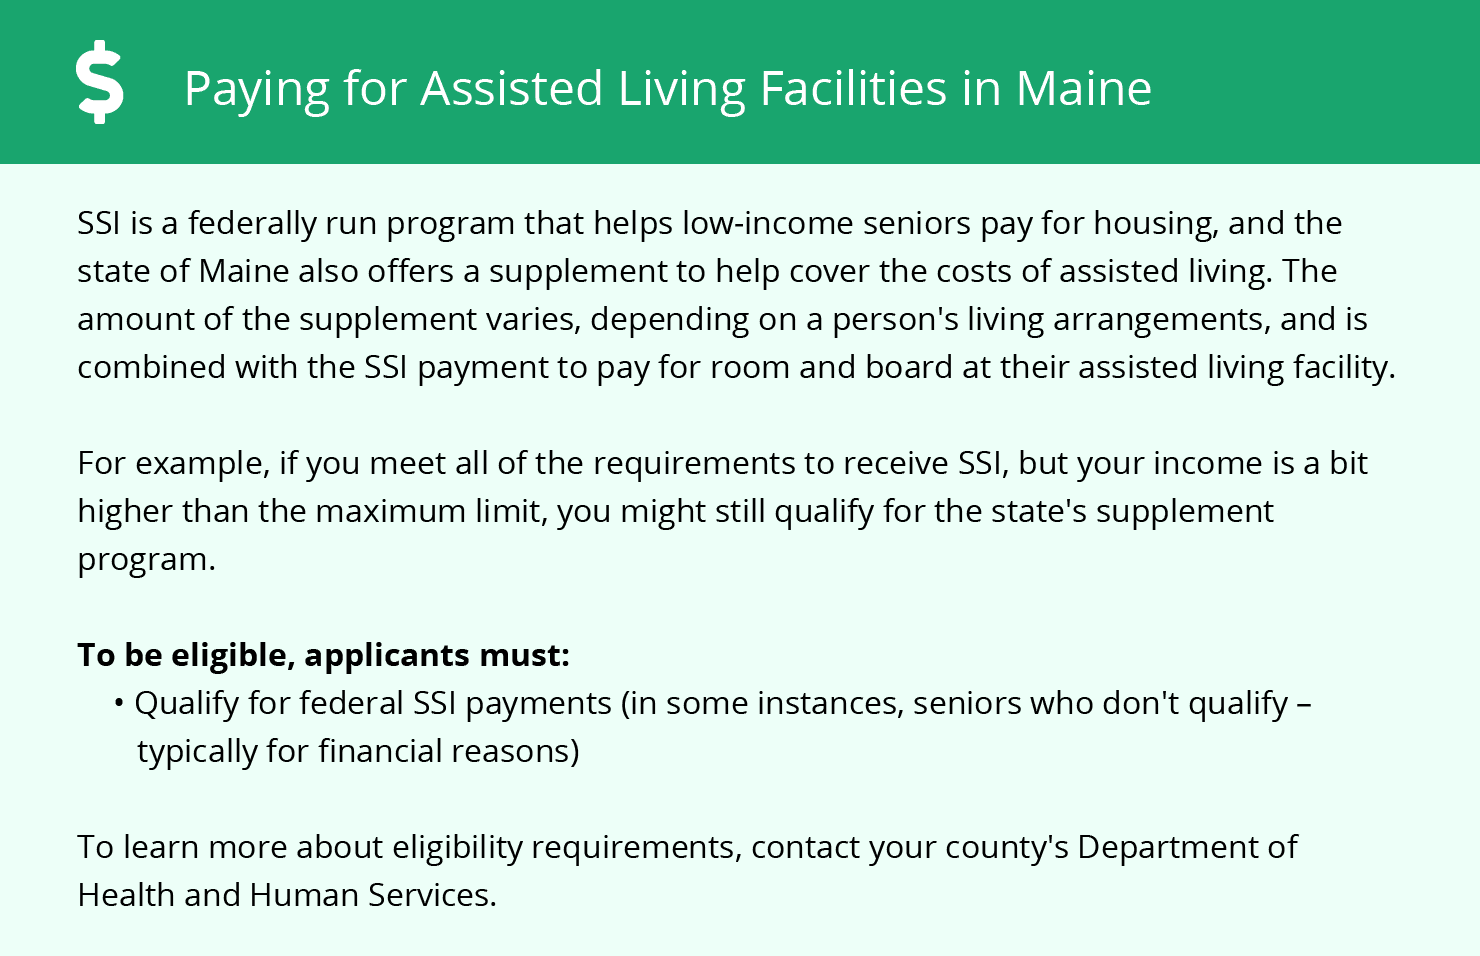 Paying for Assisted Living Facilities in Maine